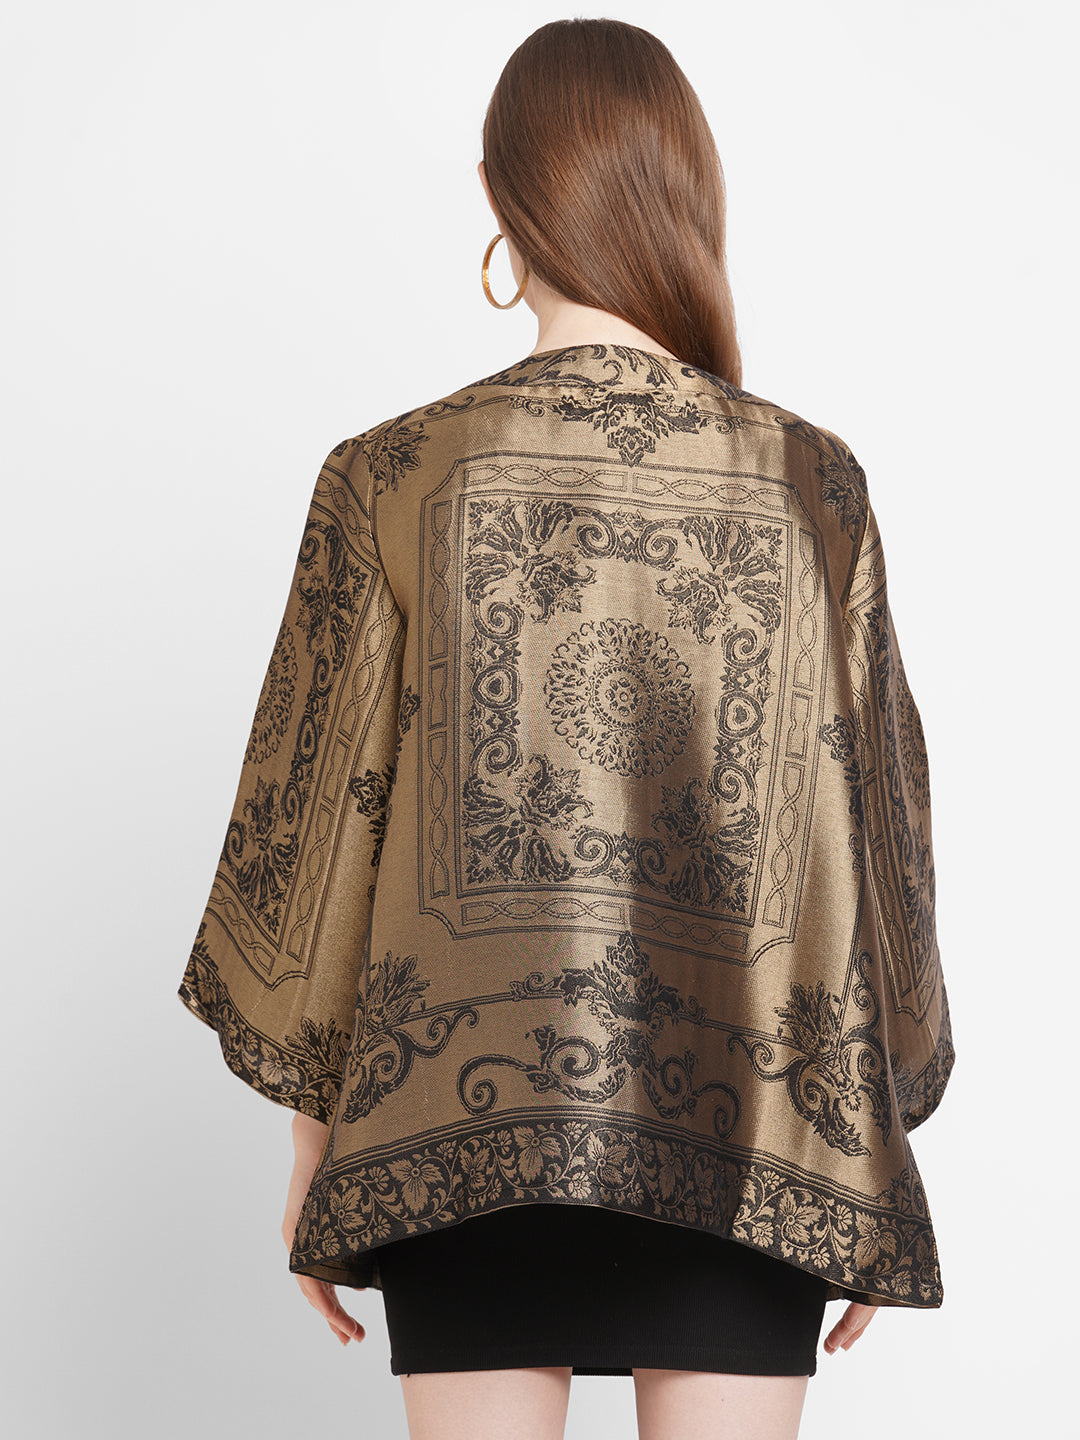 Brocade French Patterned Jacket